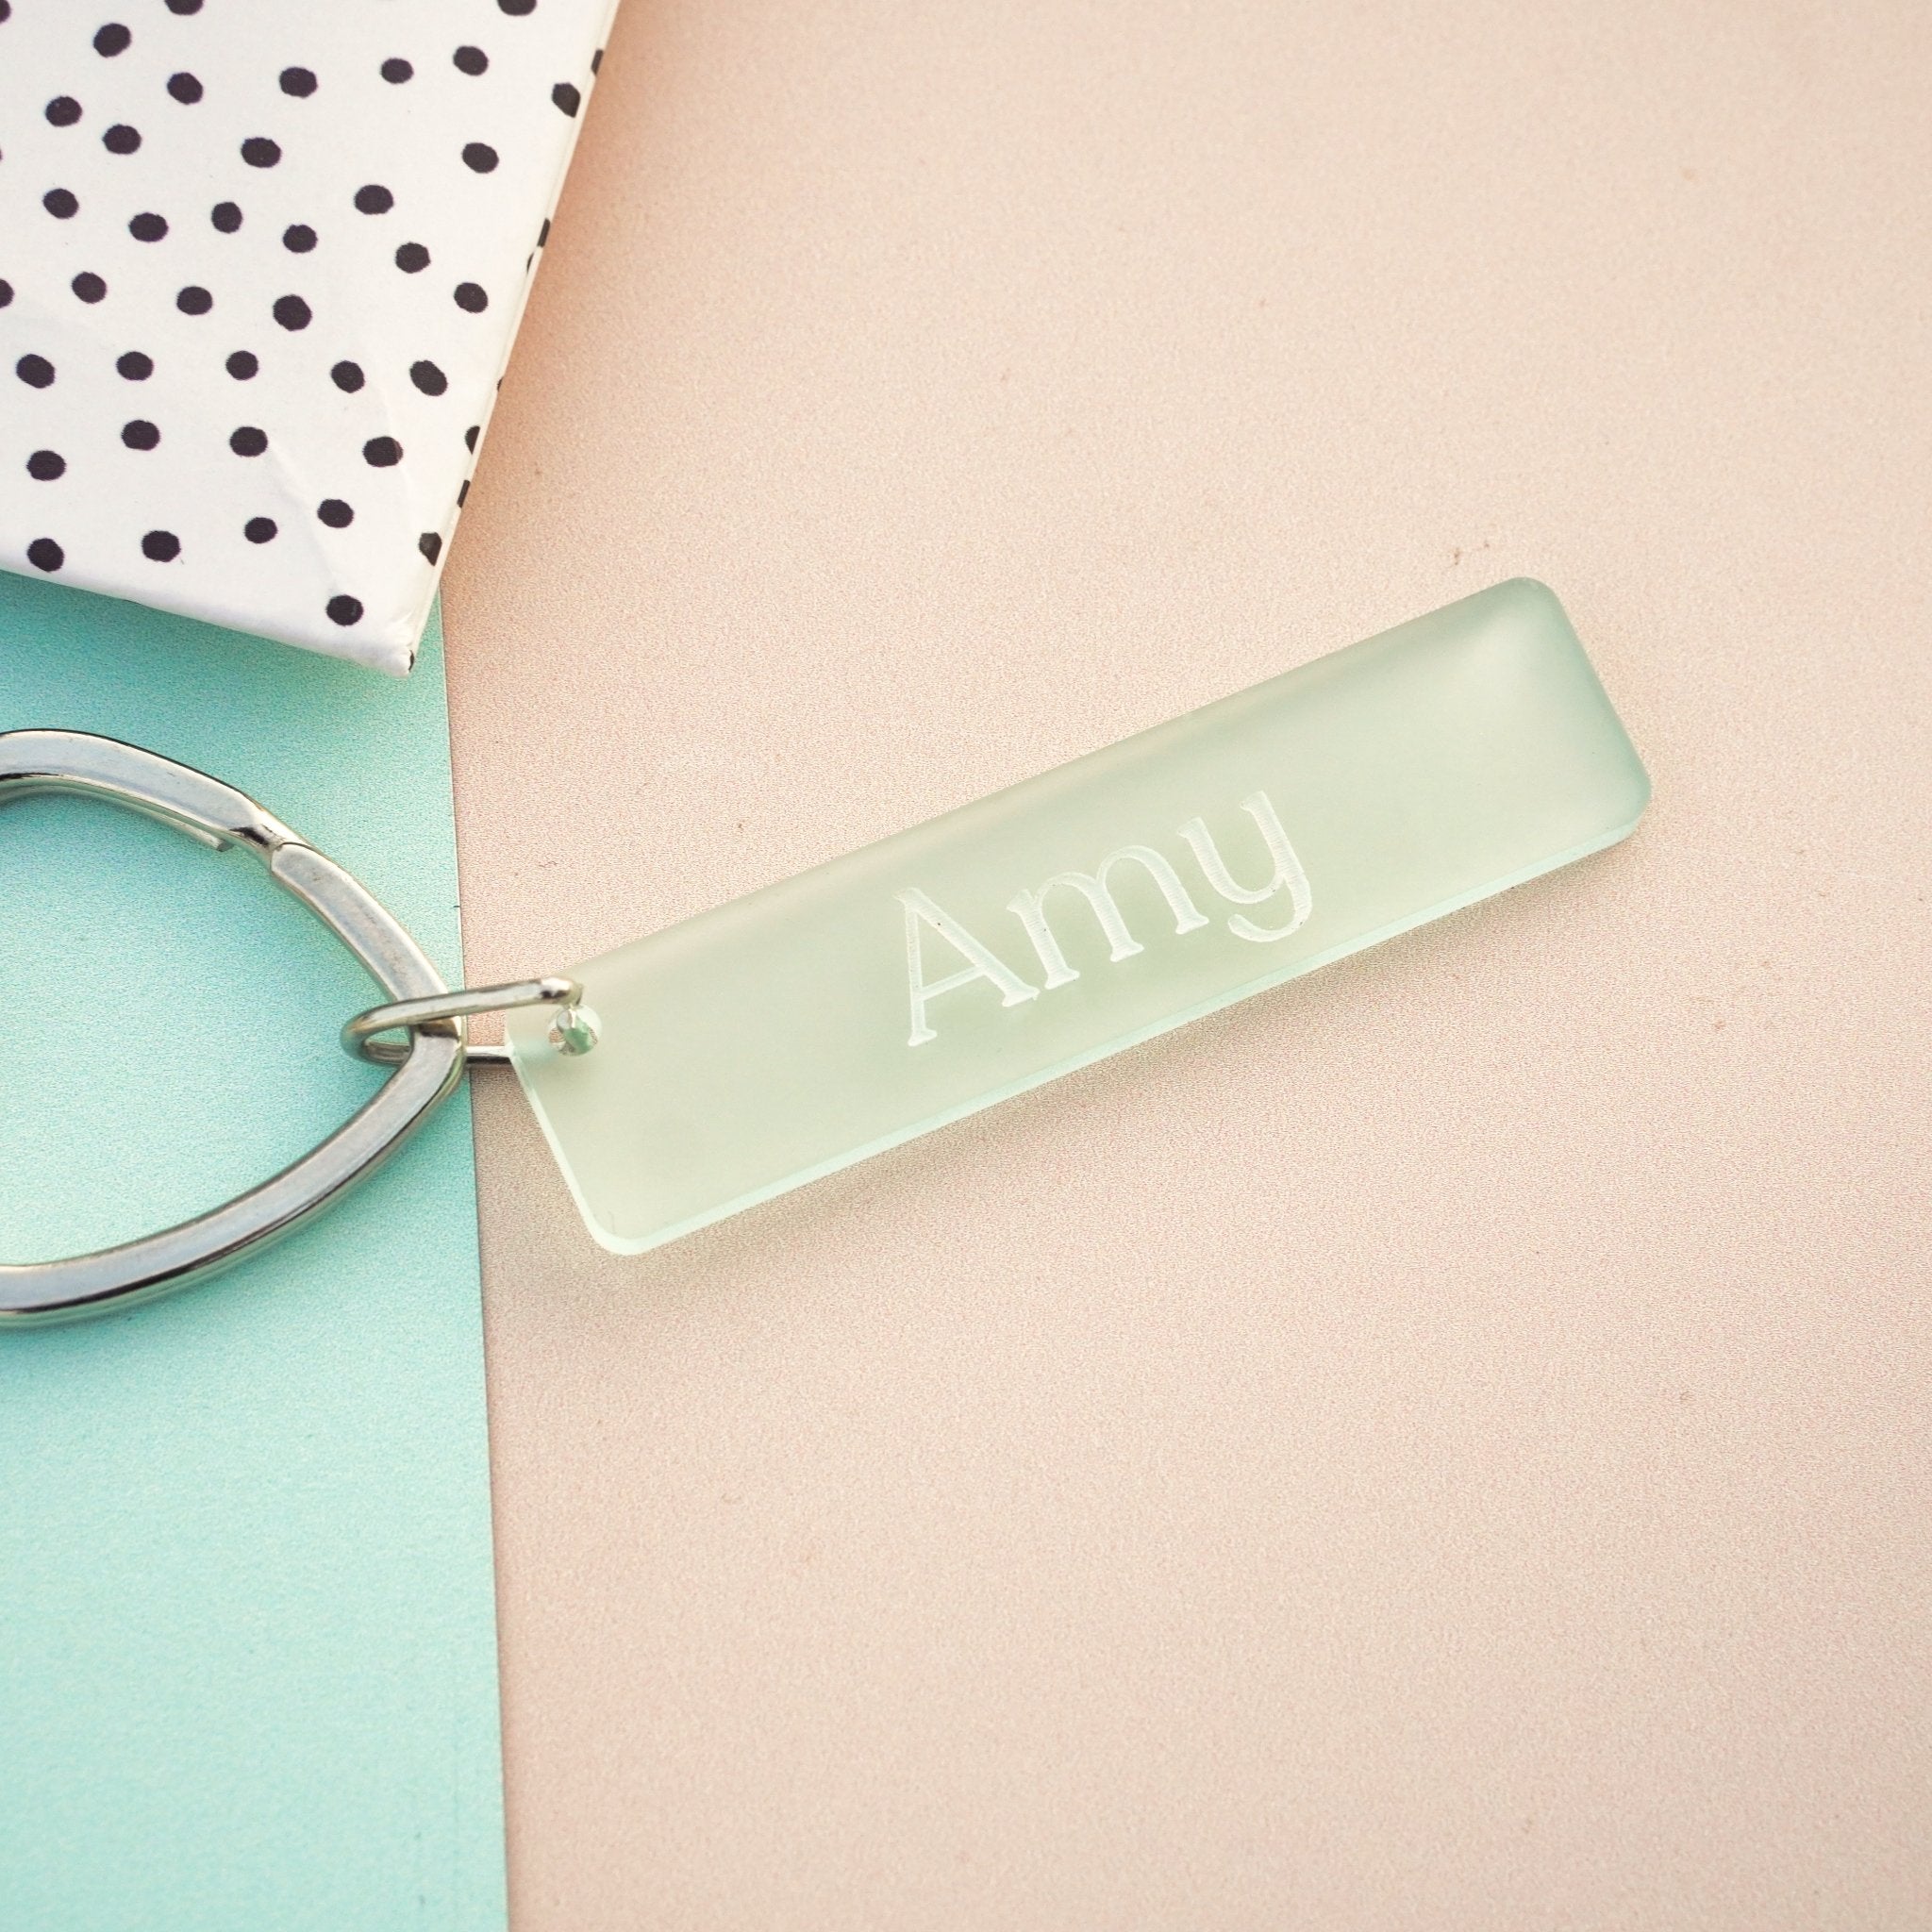 personalised engraved key chain perfect personalised gift 